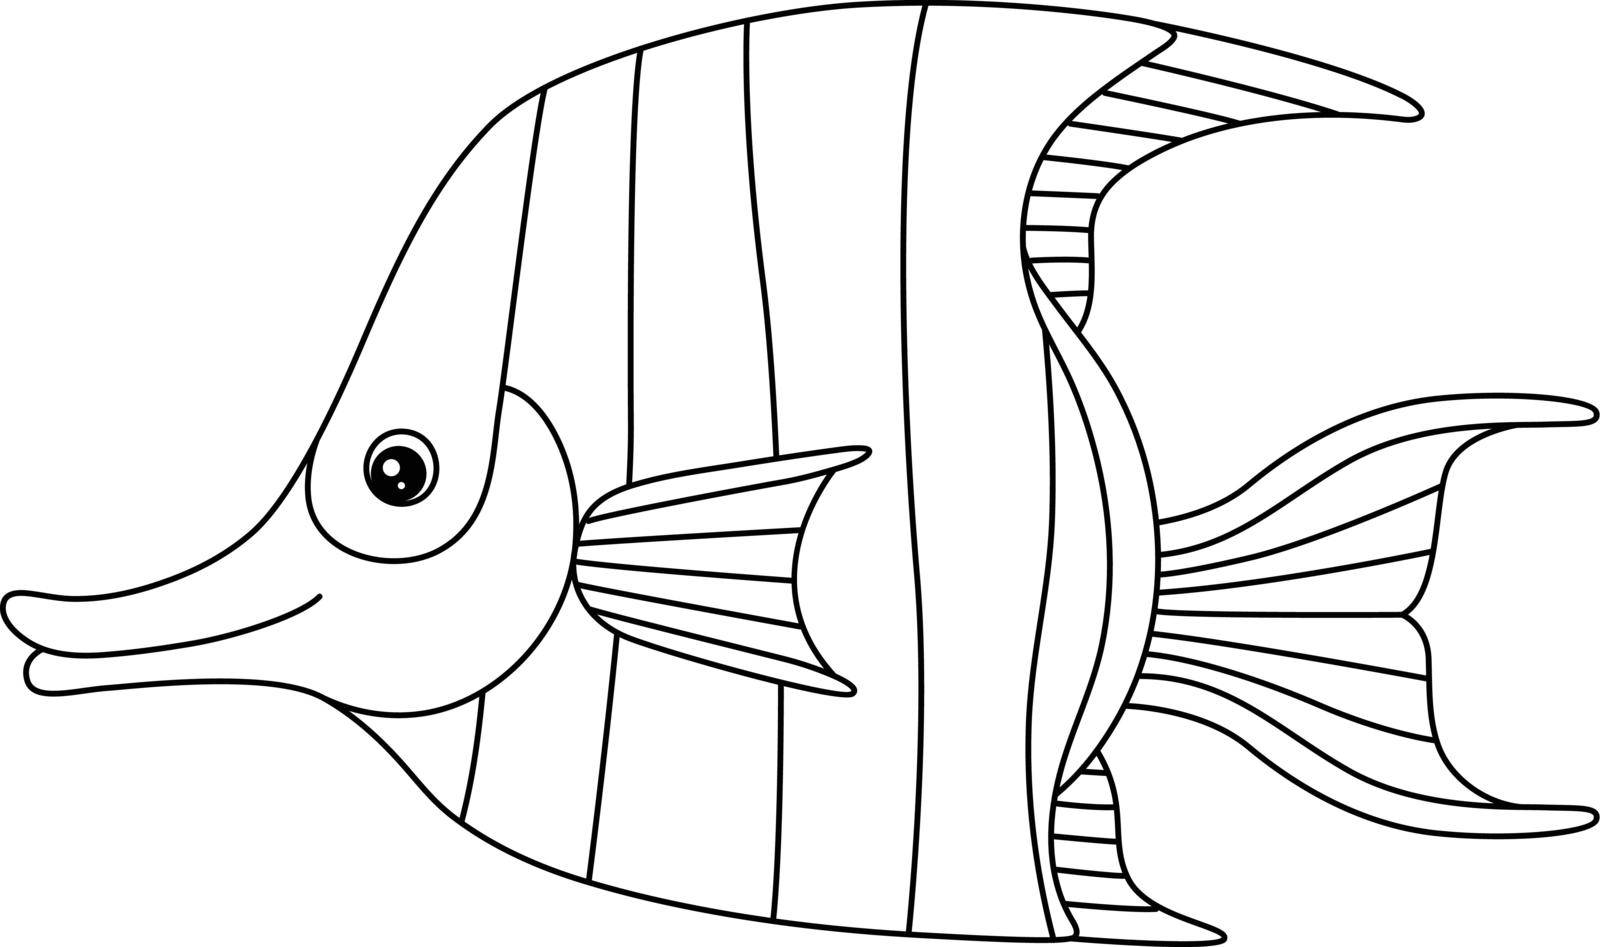 Angelfish Coloring Page Isolated for Kids by abbydesign